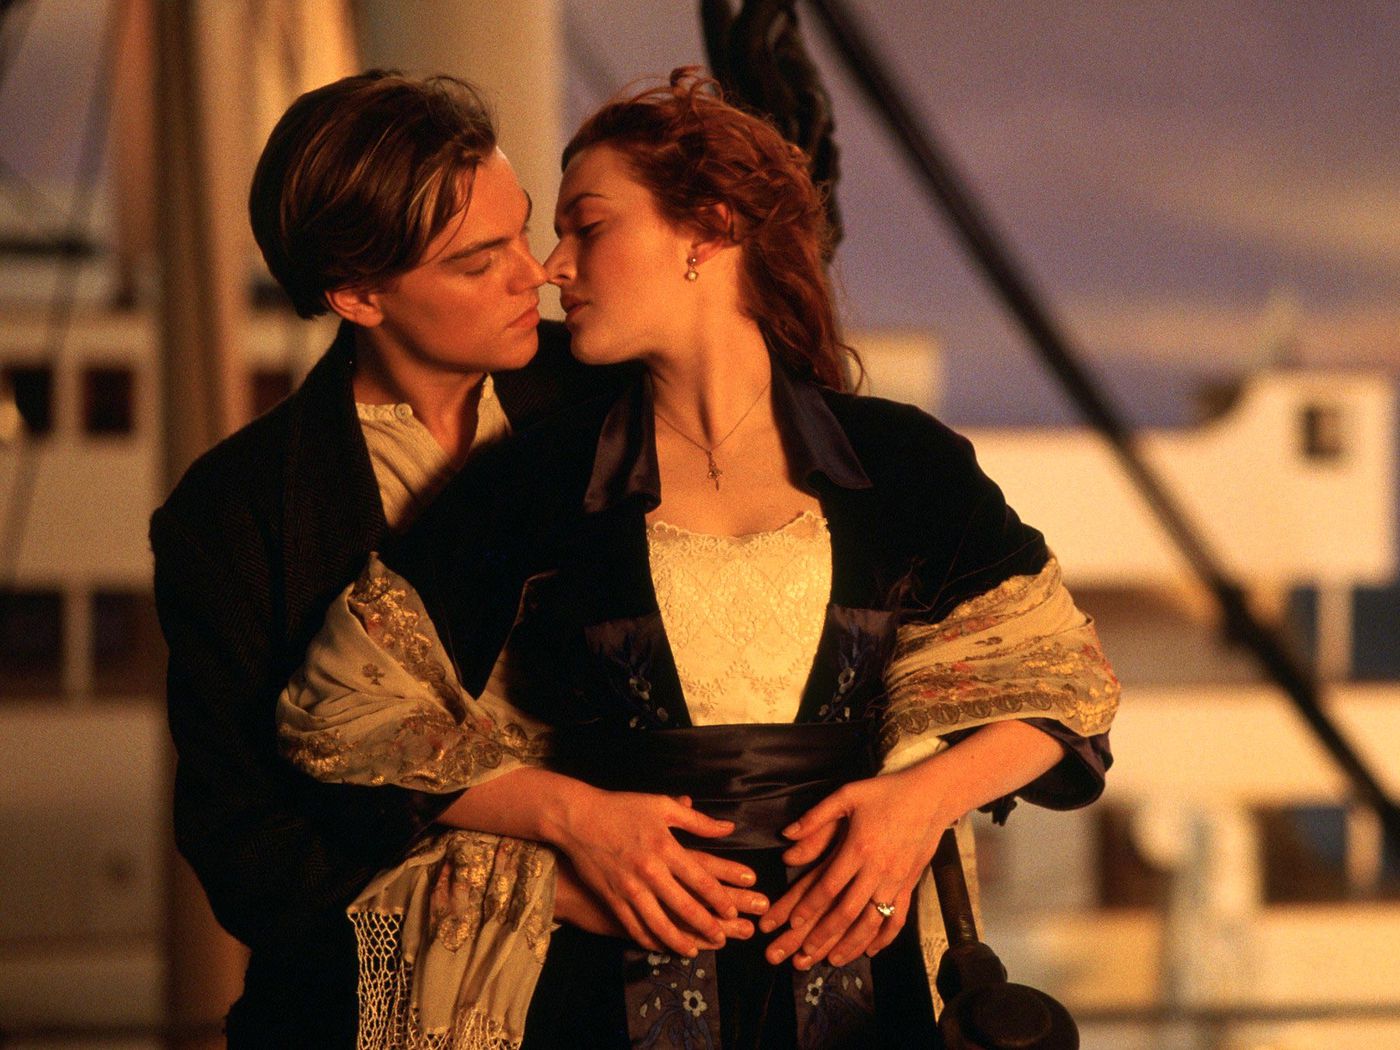 years after Titanic, we visit what it's like to watch it for the first time